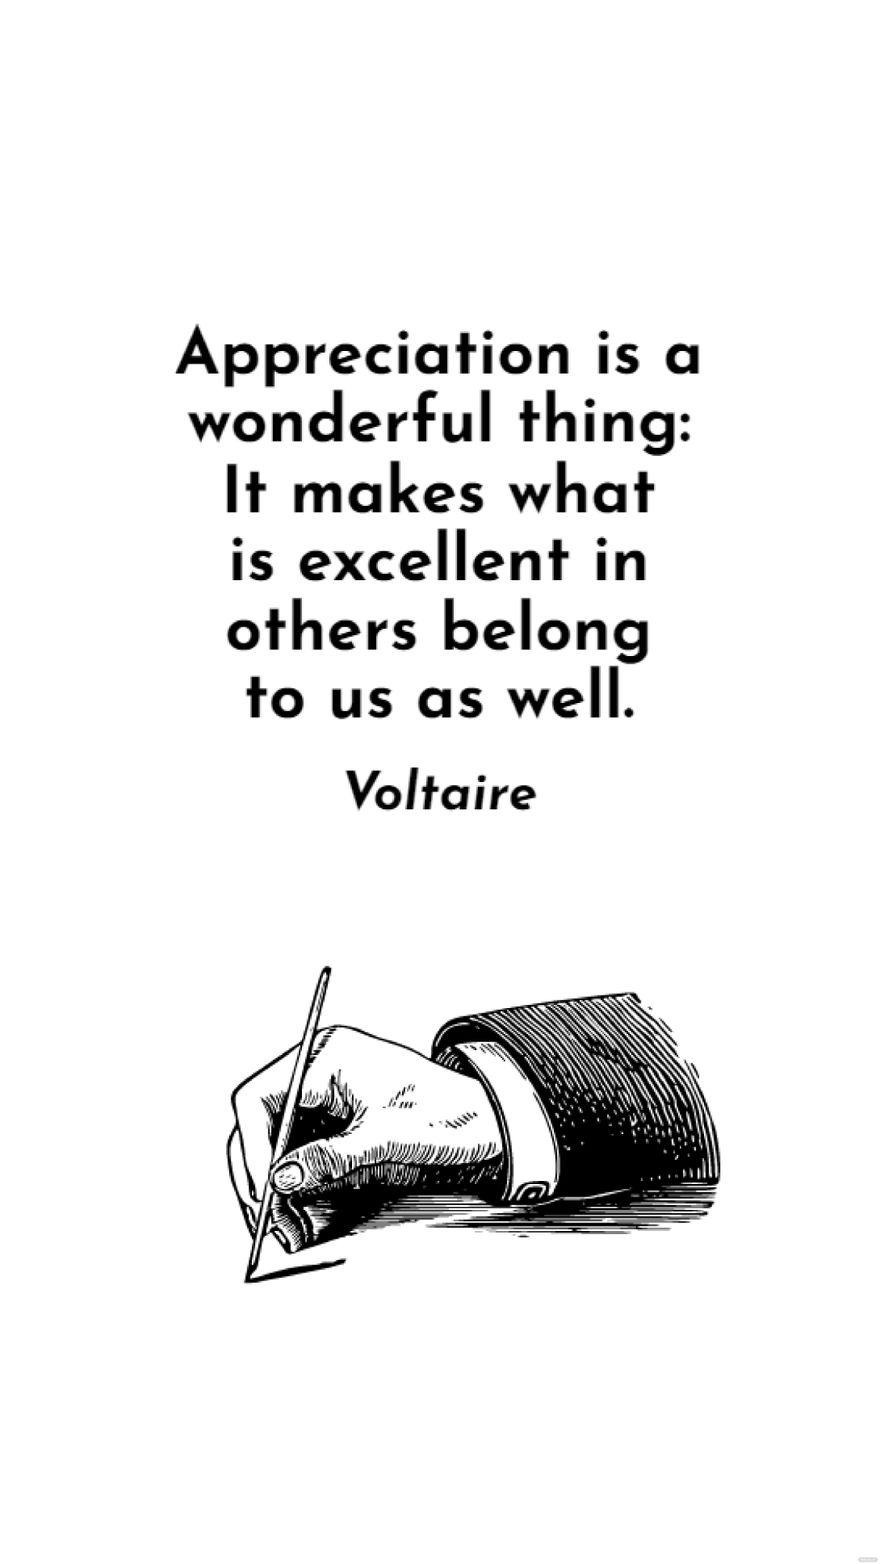 Free Voltaire - Appreciation is a wonderful thing: It makes what is excellent in others belong to us as well.